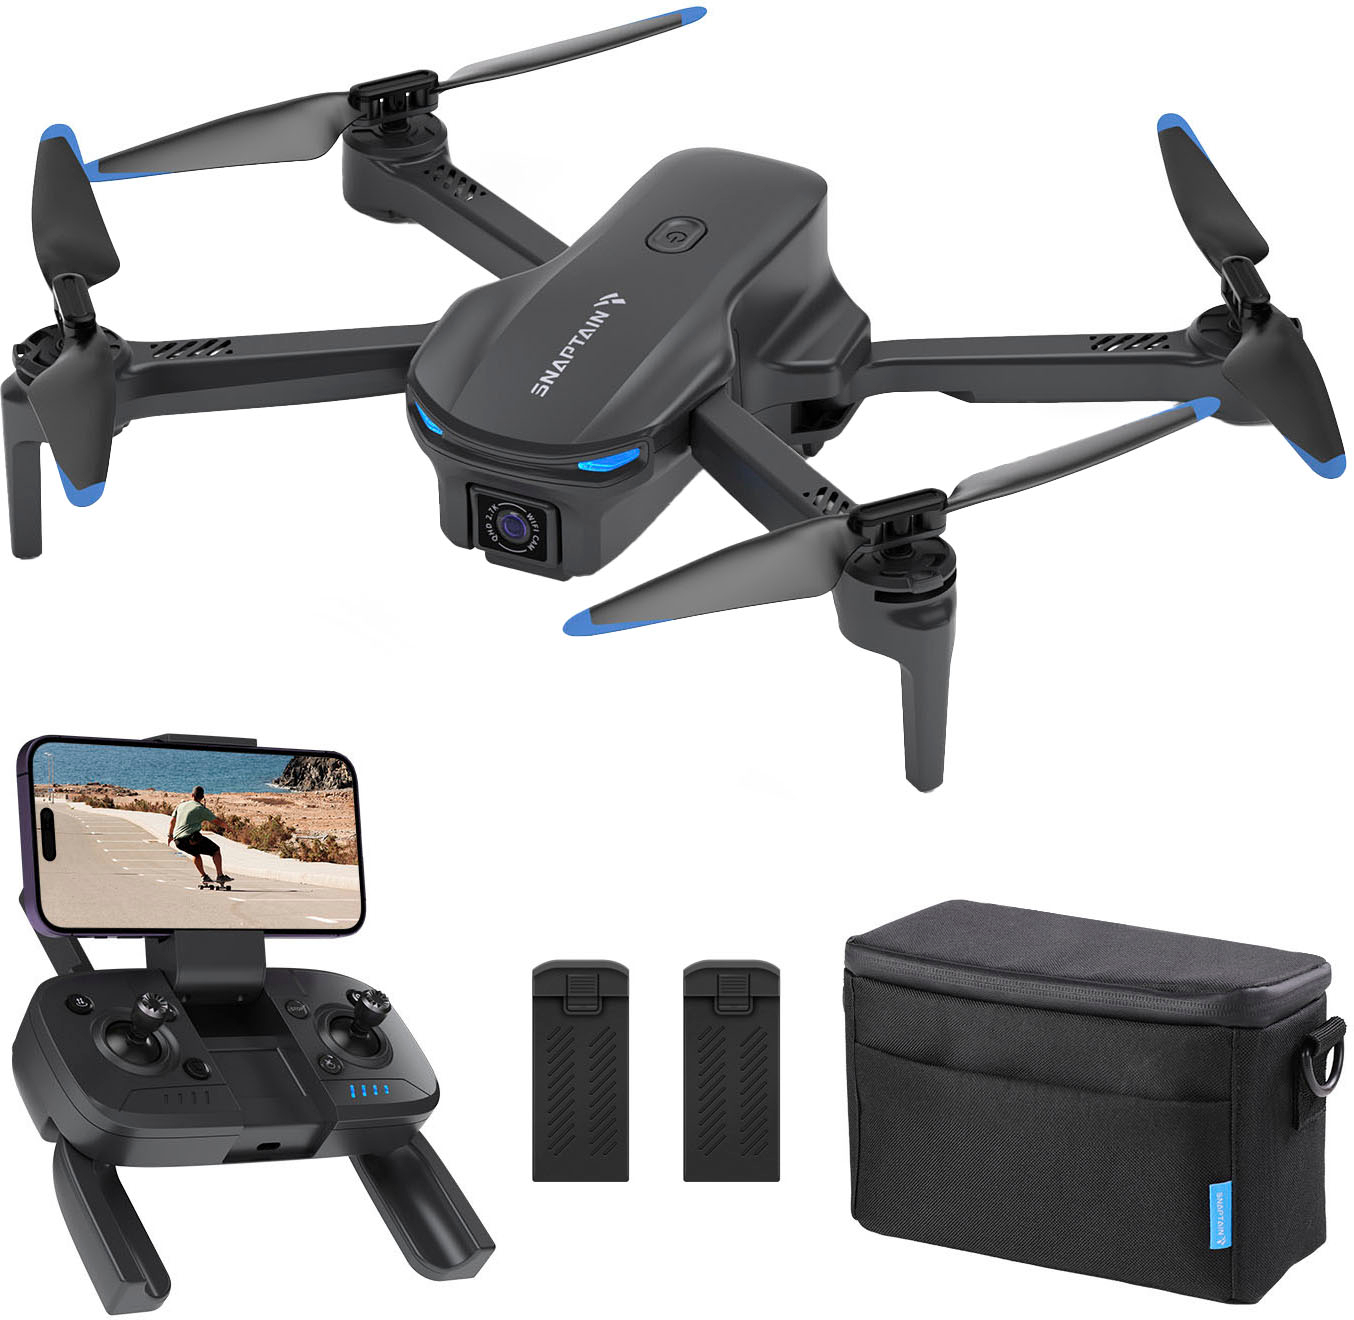 Snaptain E20 FPV Drone with 2.7K Camera and Remote Controller Gray 